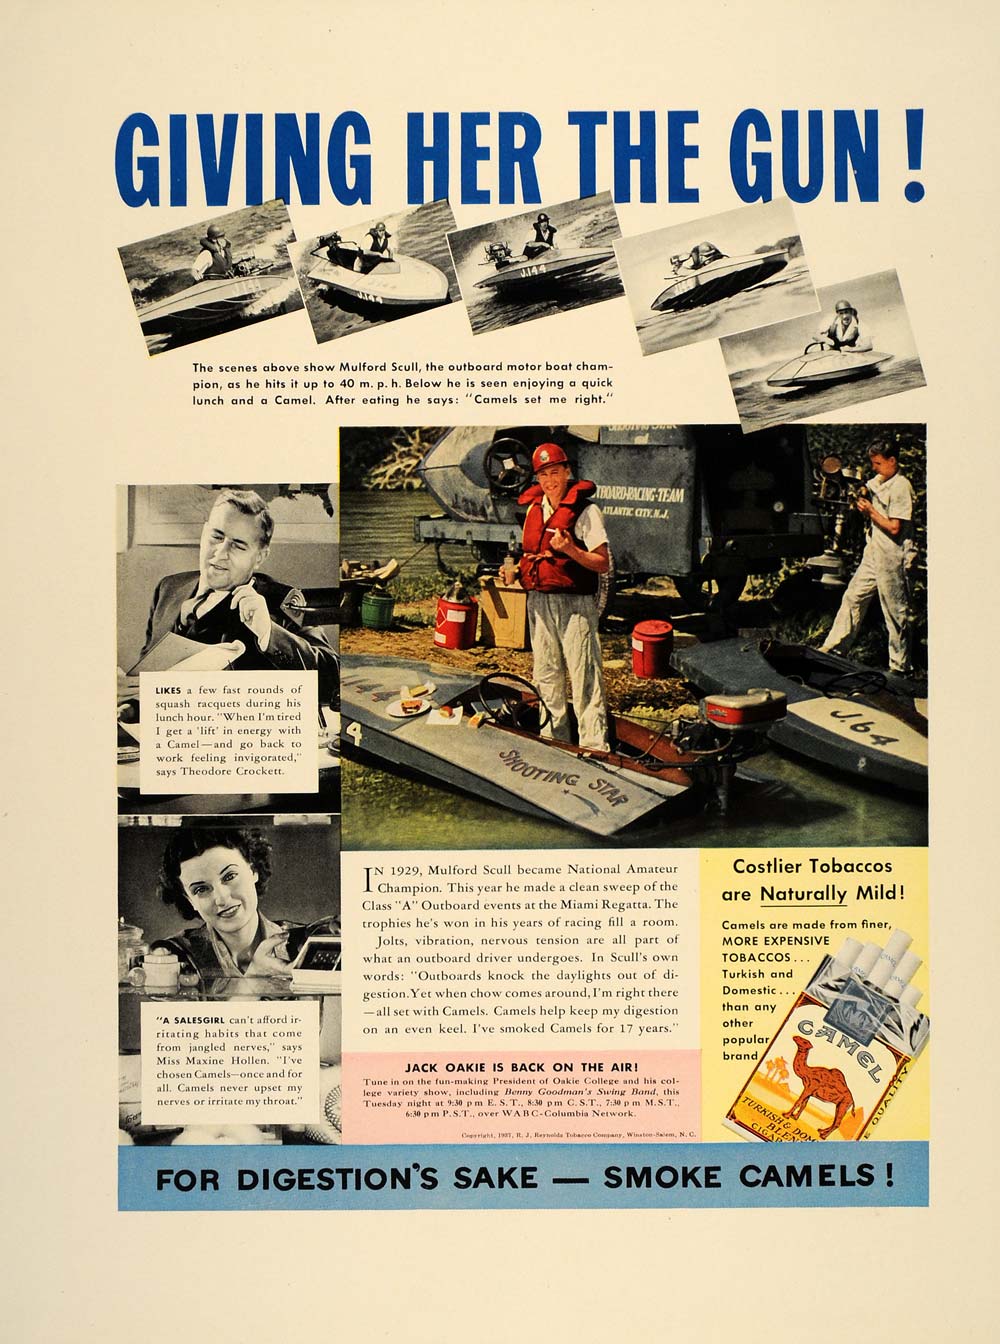 1937 Ad Camel Cigarettes Mulford Scull Outboard Motor - ORIGINAL ADVERTISING FT8